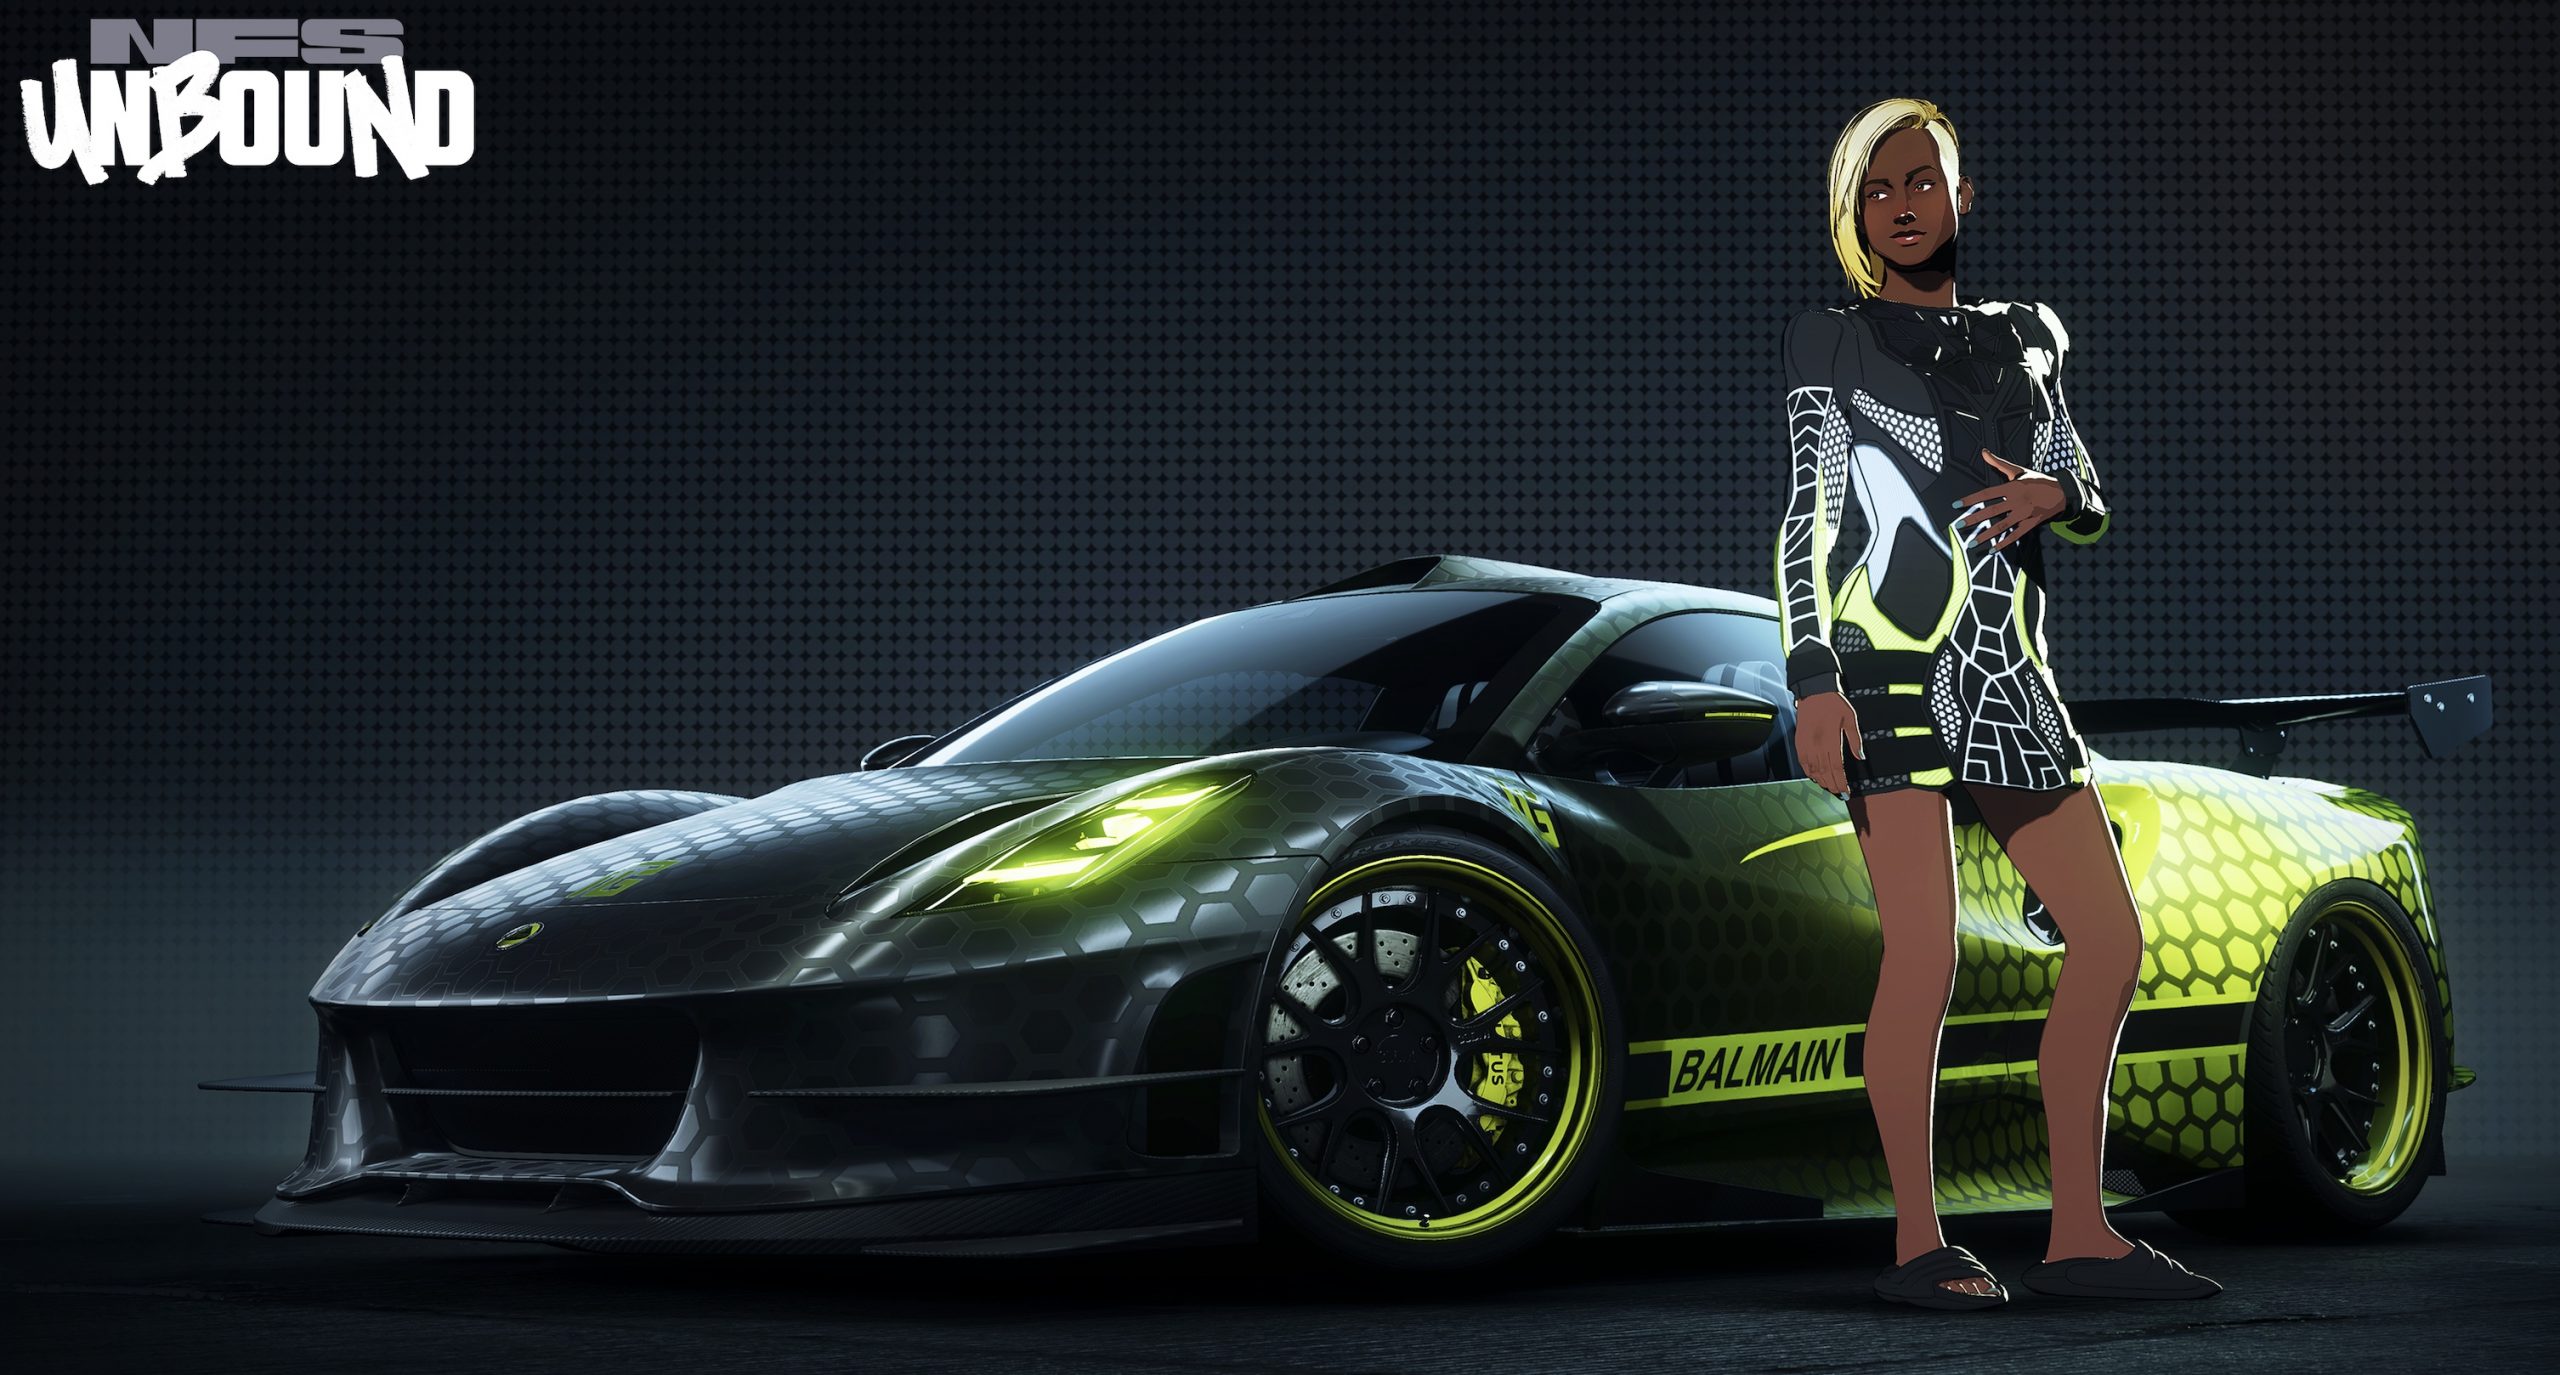 EA Partners With Balmain Fashion House For Exclusive NFS Unbound